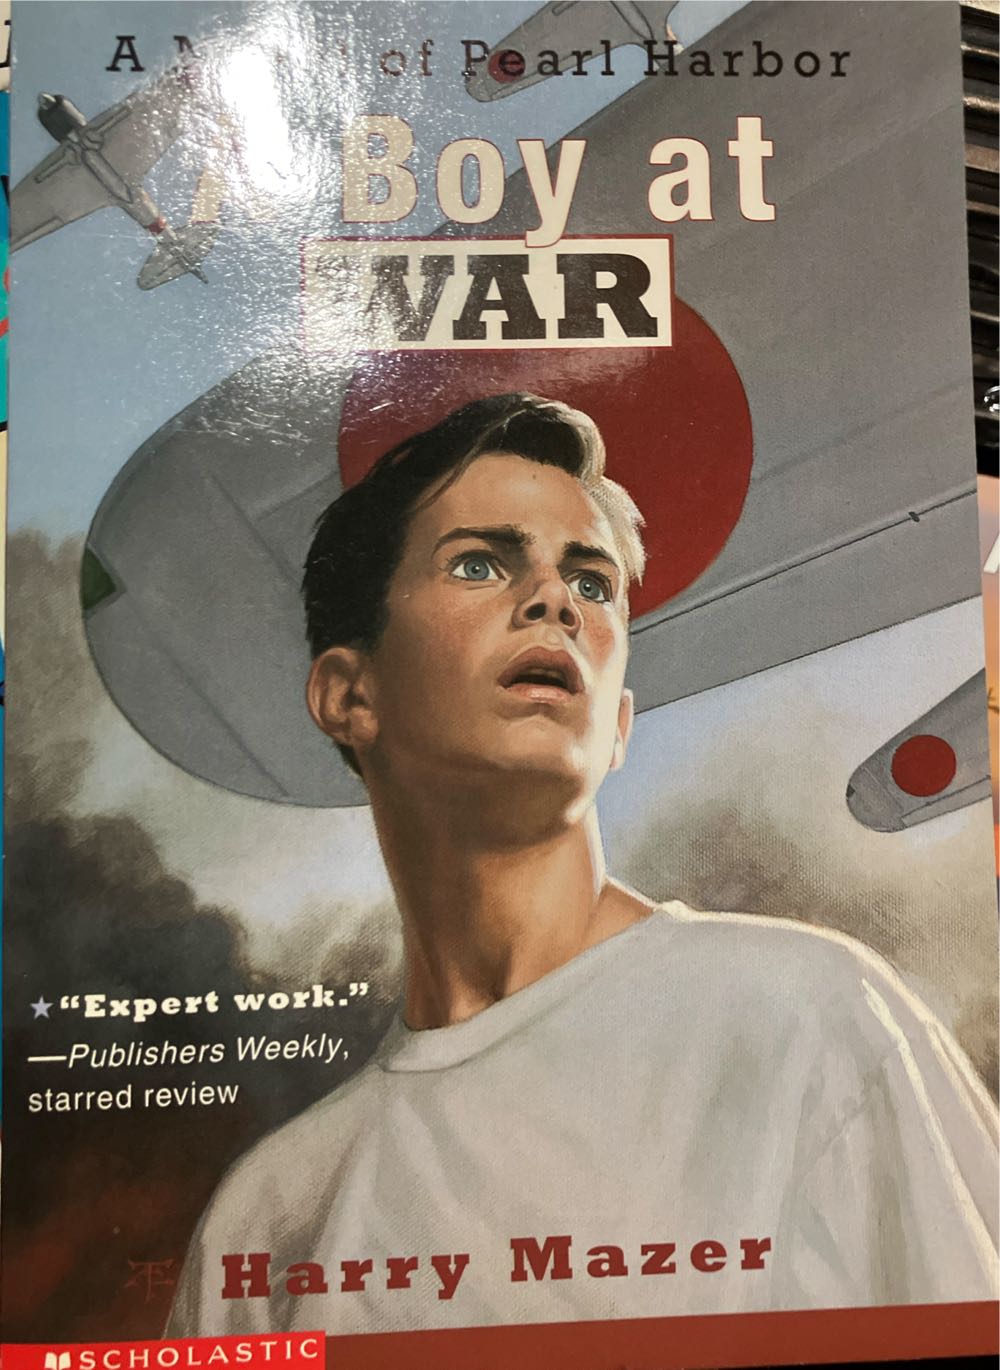 A Boy at War: A Novel of Pearl Harbor - Harry Mazer (Scholastic Inc - Paperback) book collectible [Barcode 9780439352079] - Main Image 3